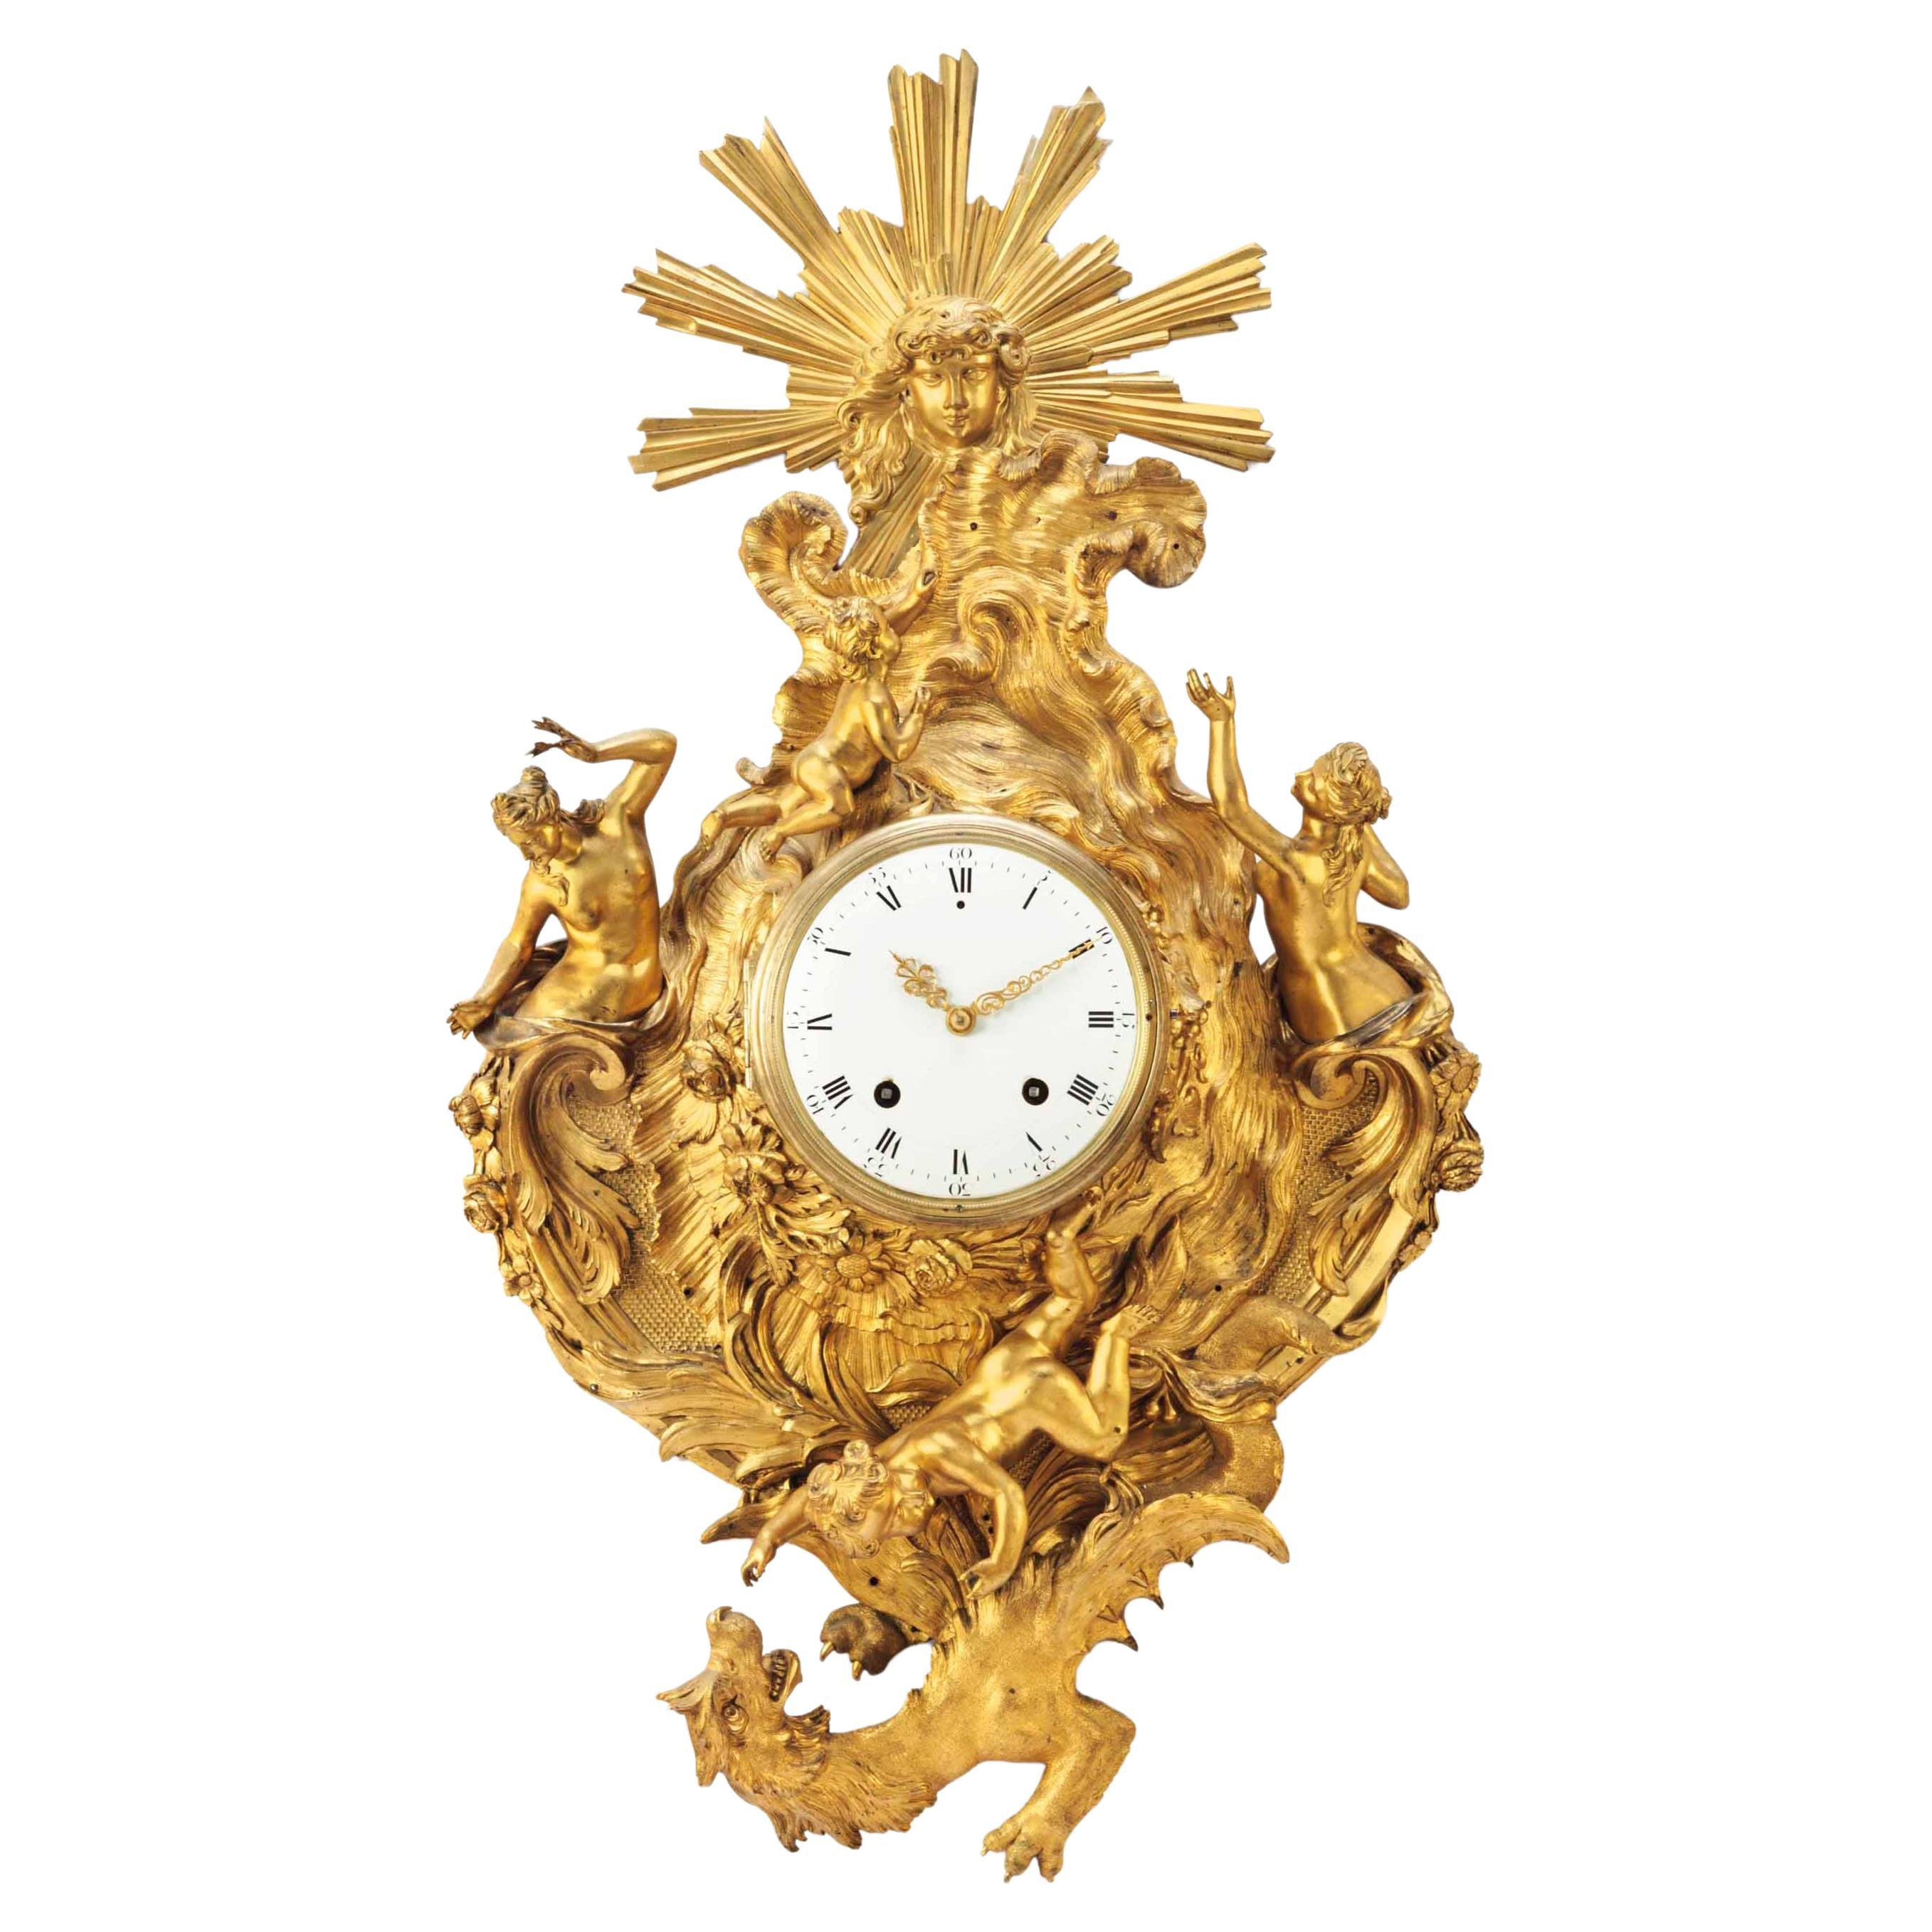 ITEM: A LOUIS XV ORMOLU CARTEL CLOCK
AUTHOR: CHARLES BALTHAZAR
PERIOD: APPROXIMATELY 1745
Dimensions:
40 ¼ in. (102.3 cm.) high, 23 in. (58.5 cm.) wide

 A mask of Apollo is on the top. The central part is an asymmetrical rockwork case within